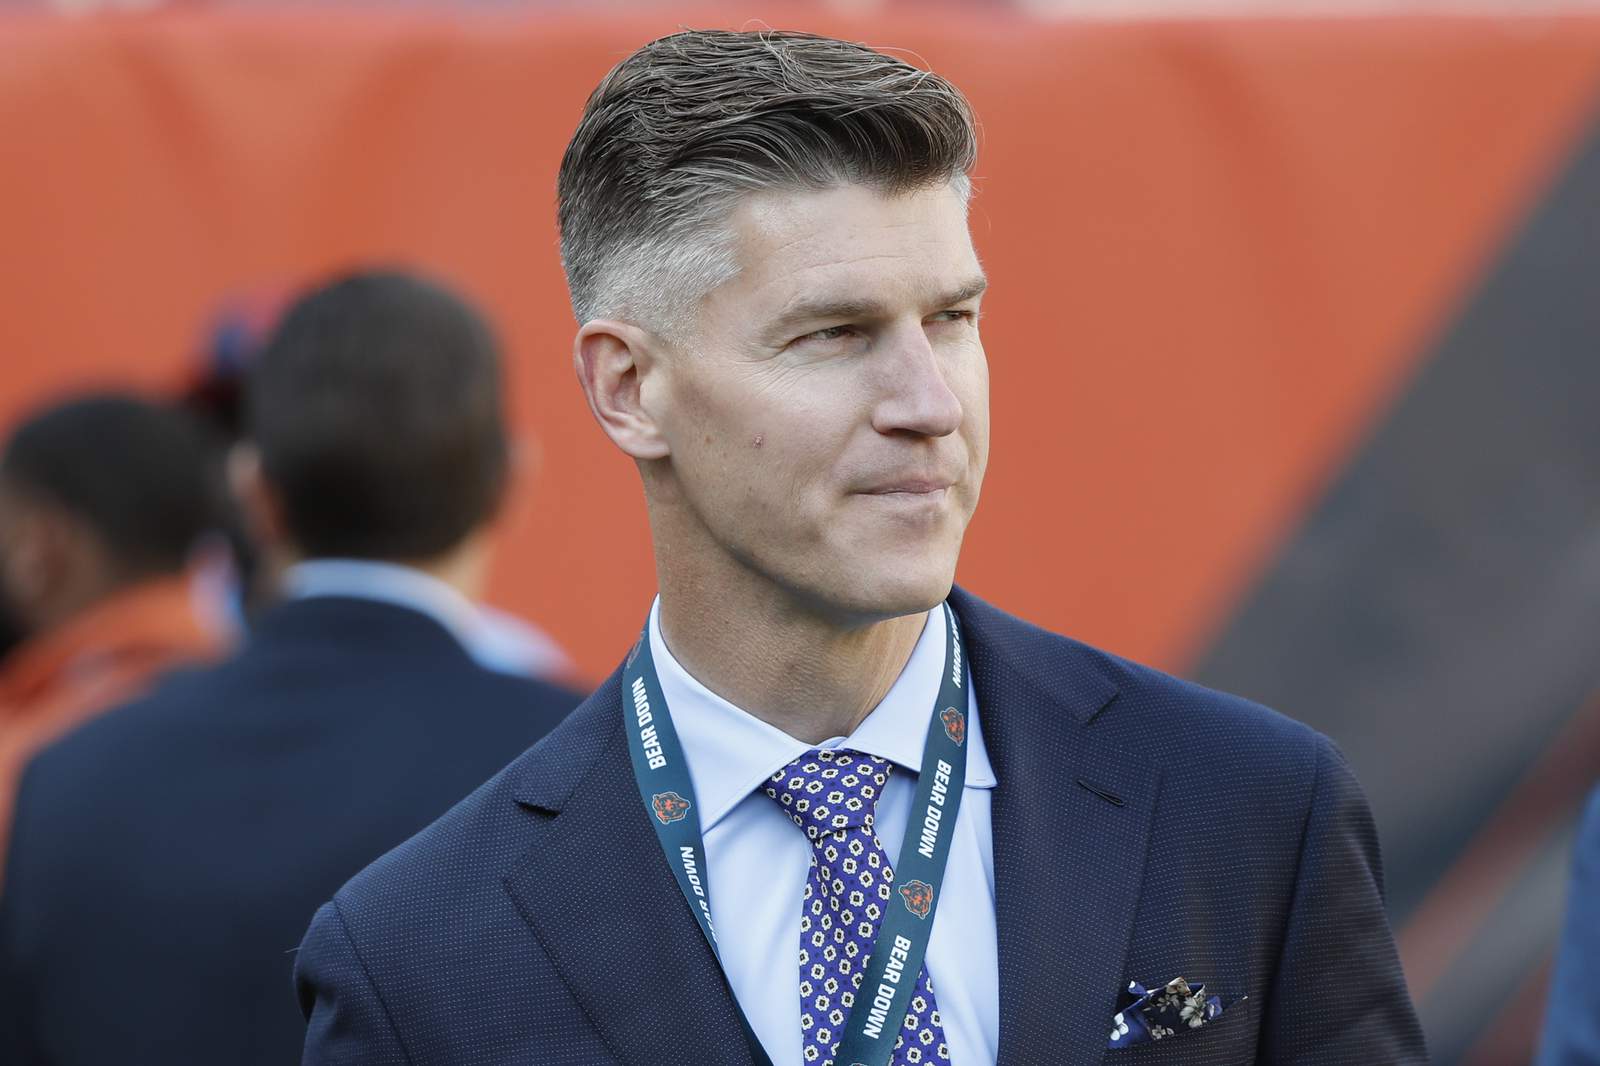 Bears plan to keep Nagy, GM Pace for at least 1 more season